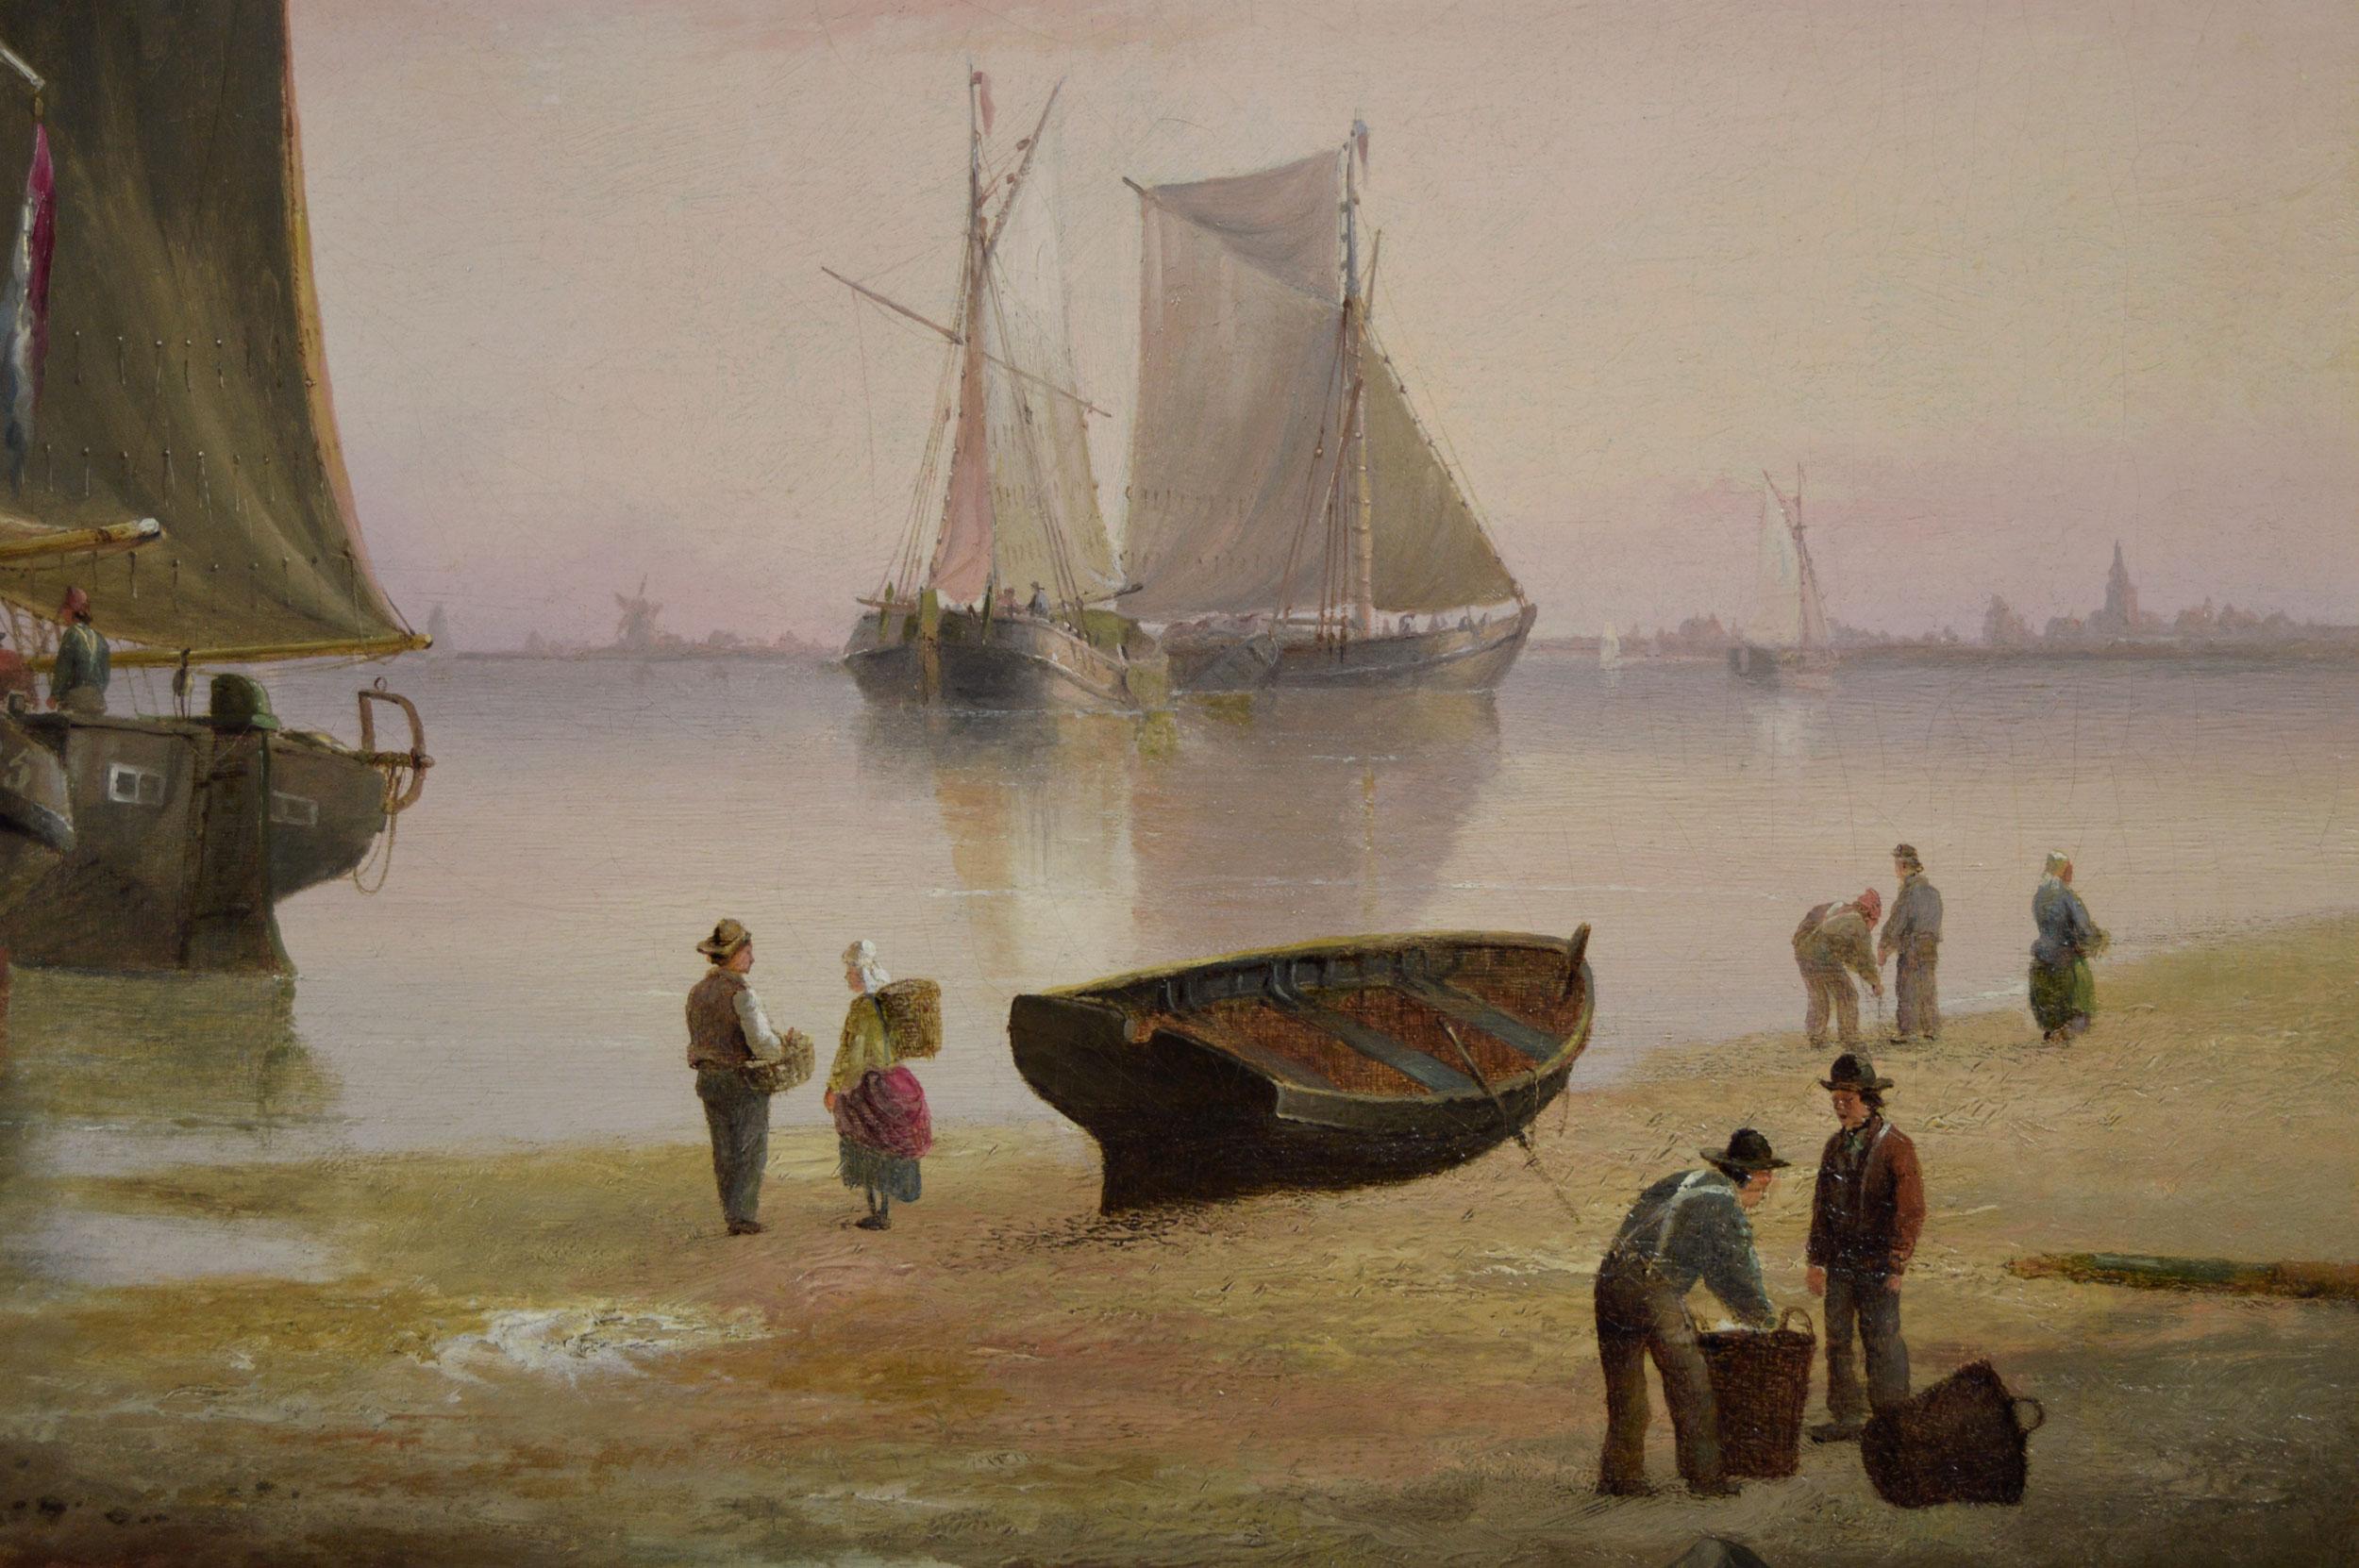 Henry Redmore
British, (1820-1887)
Trading Schooners & Dutch Luggers on the Humber Estuary
Oil on canvas, signed & dated 1873
Image size: 23.5 inches x 37.5 inches 
Size including frame: 31.25 inches x 45.25 inches

An atmospheric seascape of